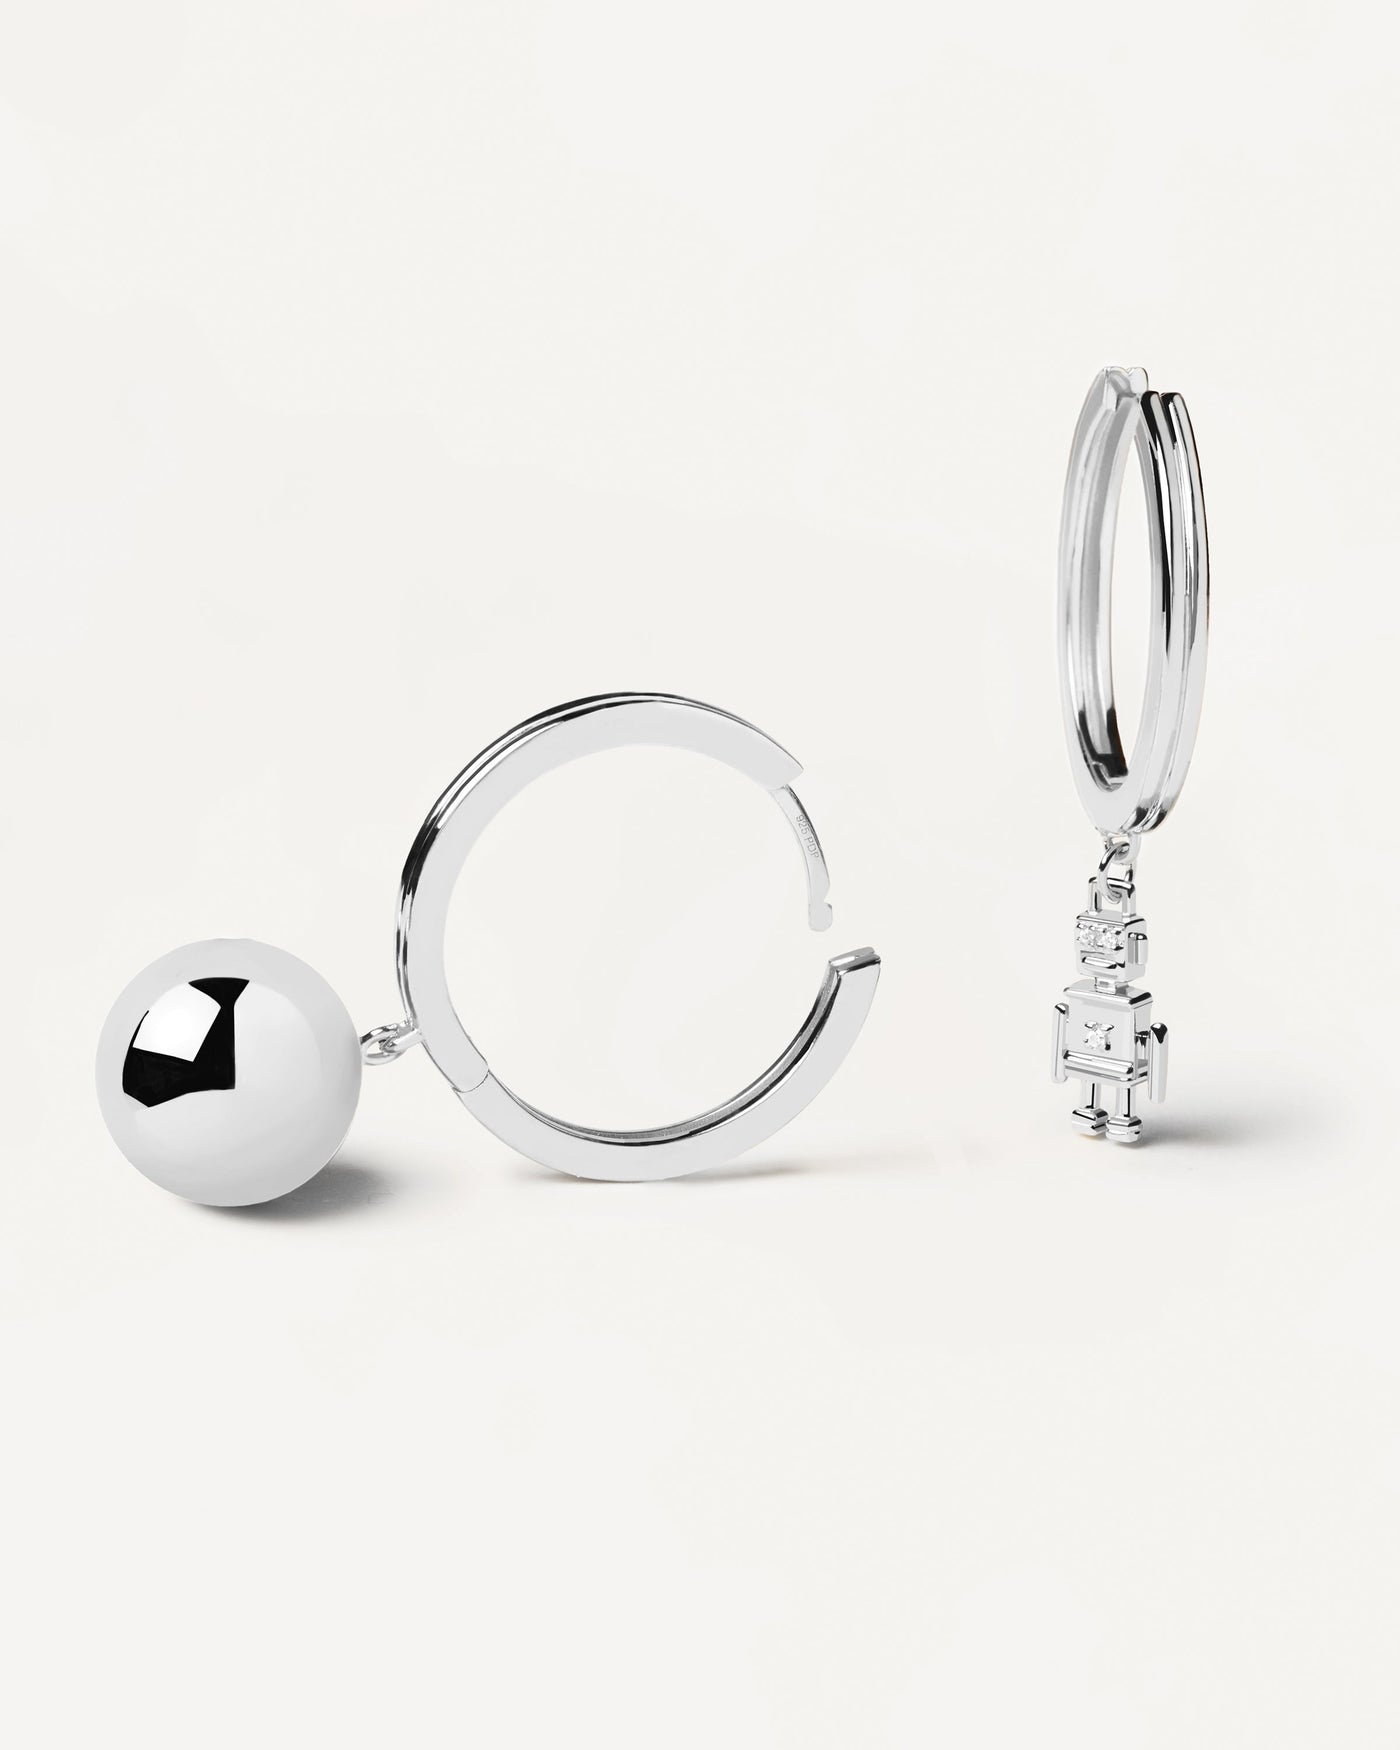 2023 Selection | Space Age Silver Earrings. 925 silver hoops with asymetric design: ball vs robot design. Get the latest arrival from PDPAOLA. Place your order safely and get this Best Seller. Free Shipping.